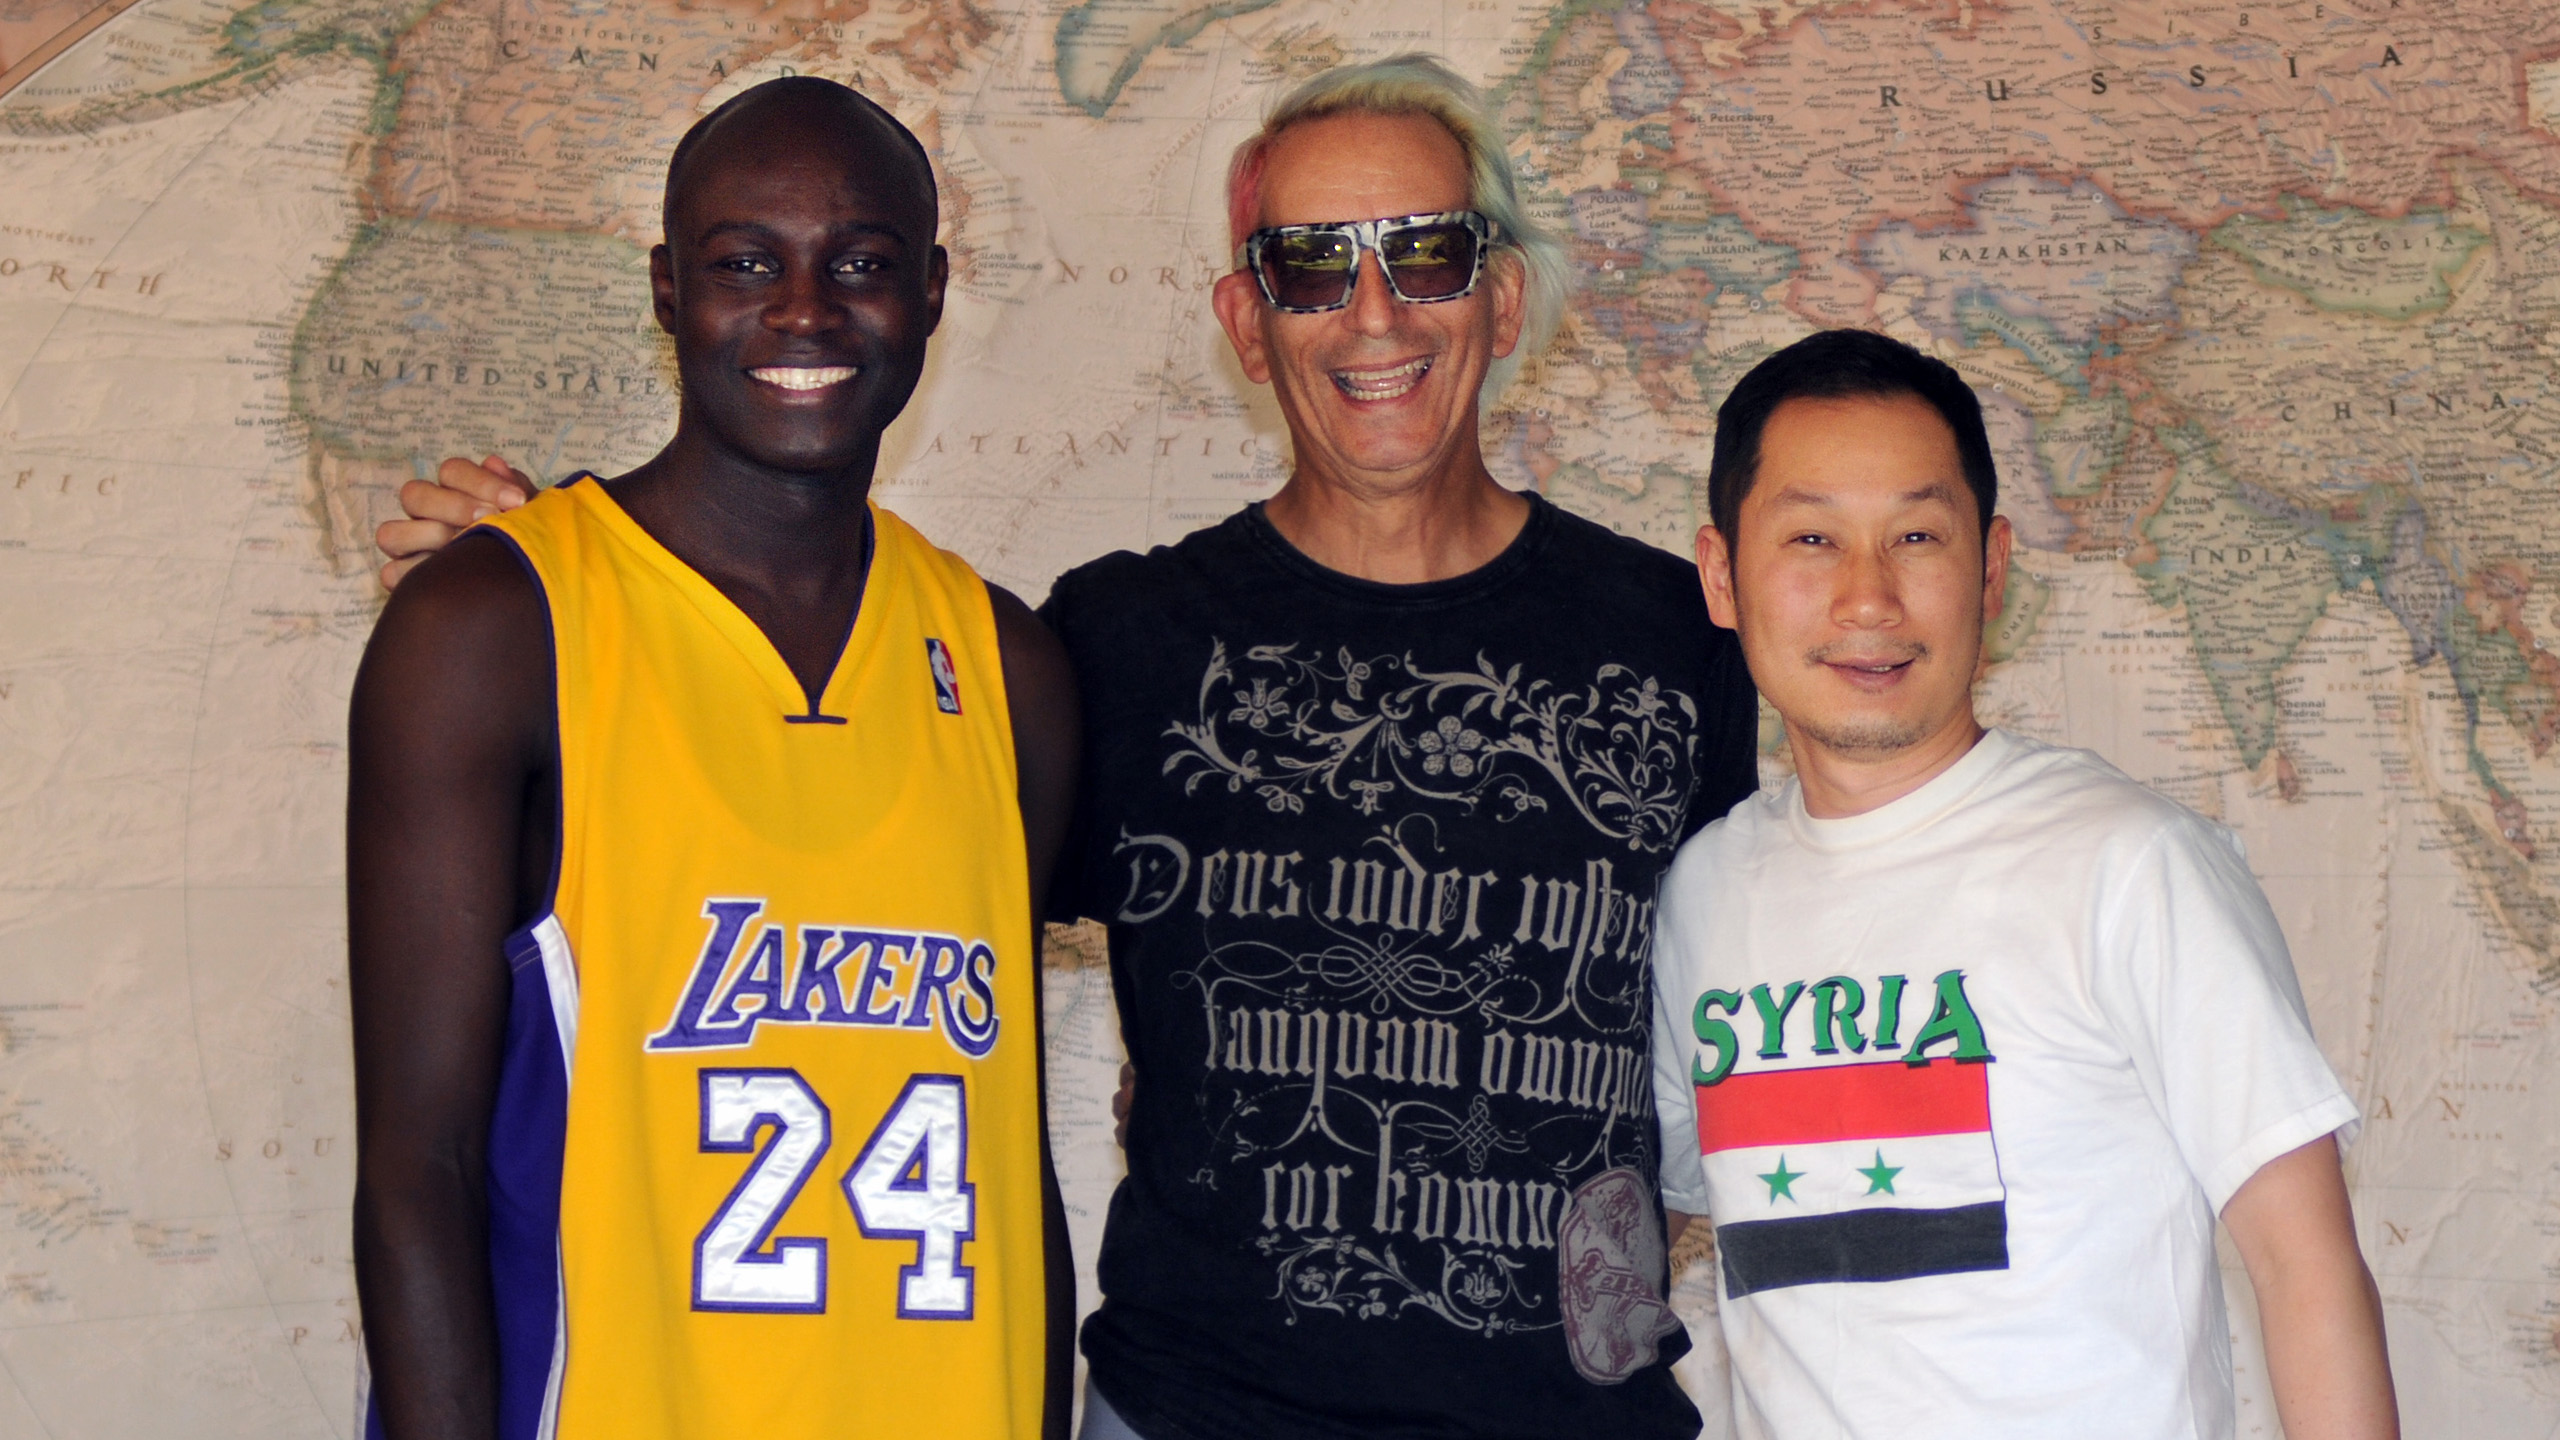 Abdoulaye Sane, Glenn Zucman & Terry Choi stand in front of a large world map. Abdoulaye wears a Laker jersey with #24, Kobe Bryant, Glenn wears a black t-shirt, and Terry wears a white t-shirt with the Syrian flag on it